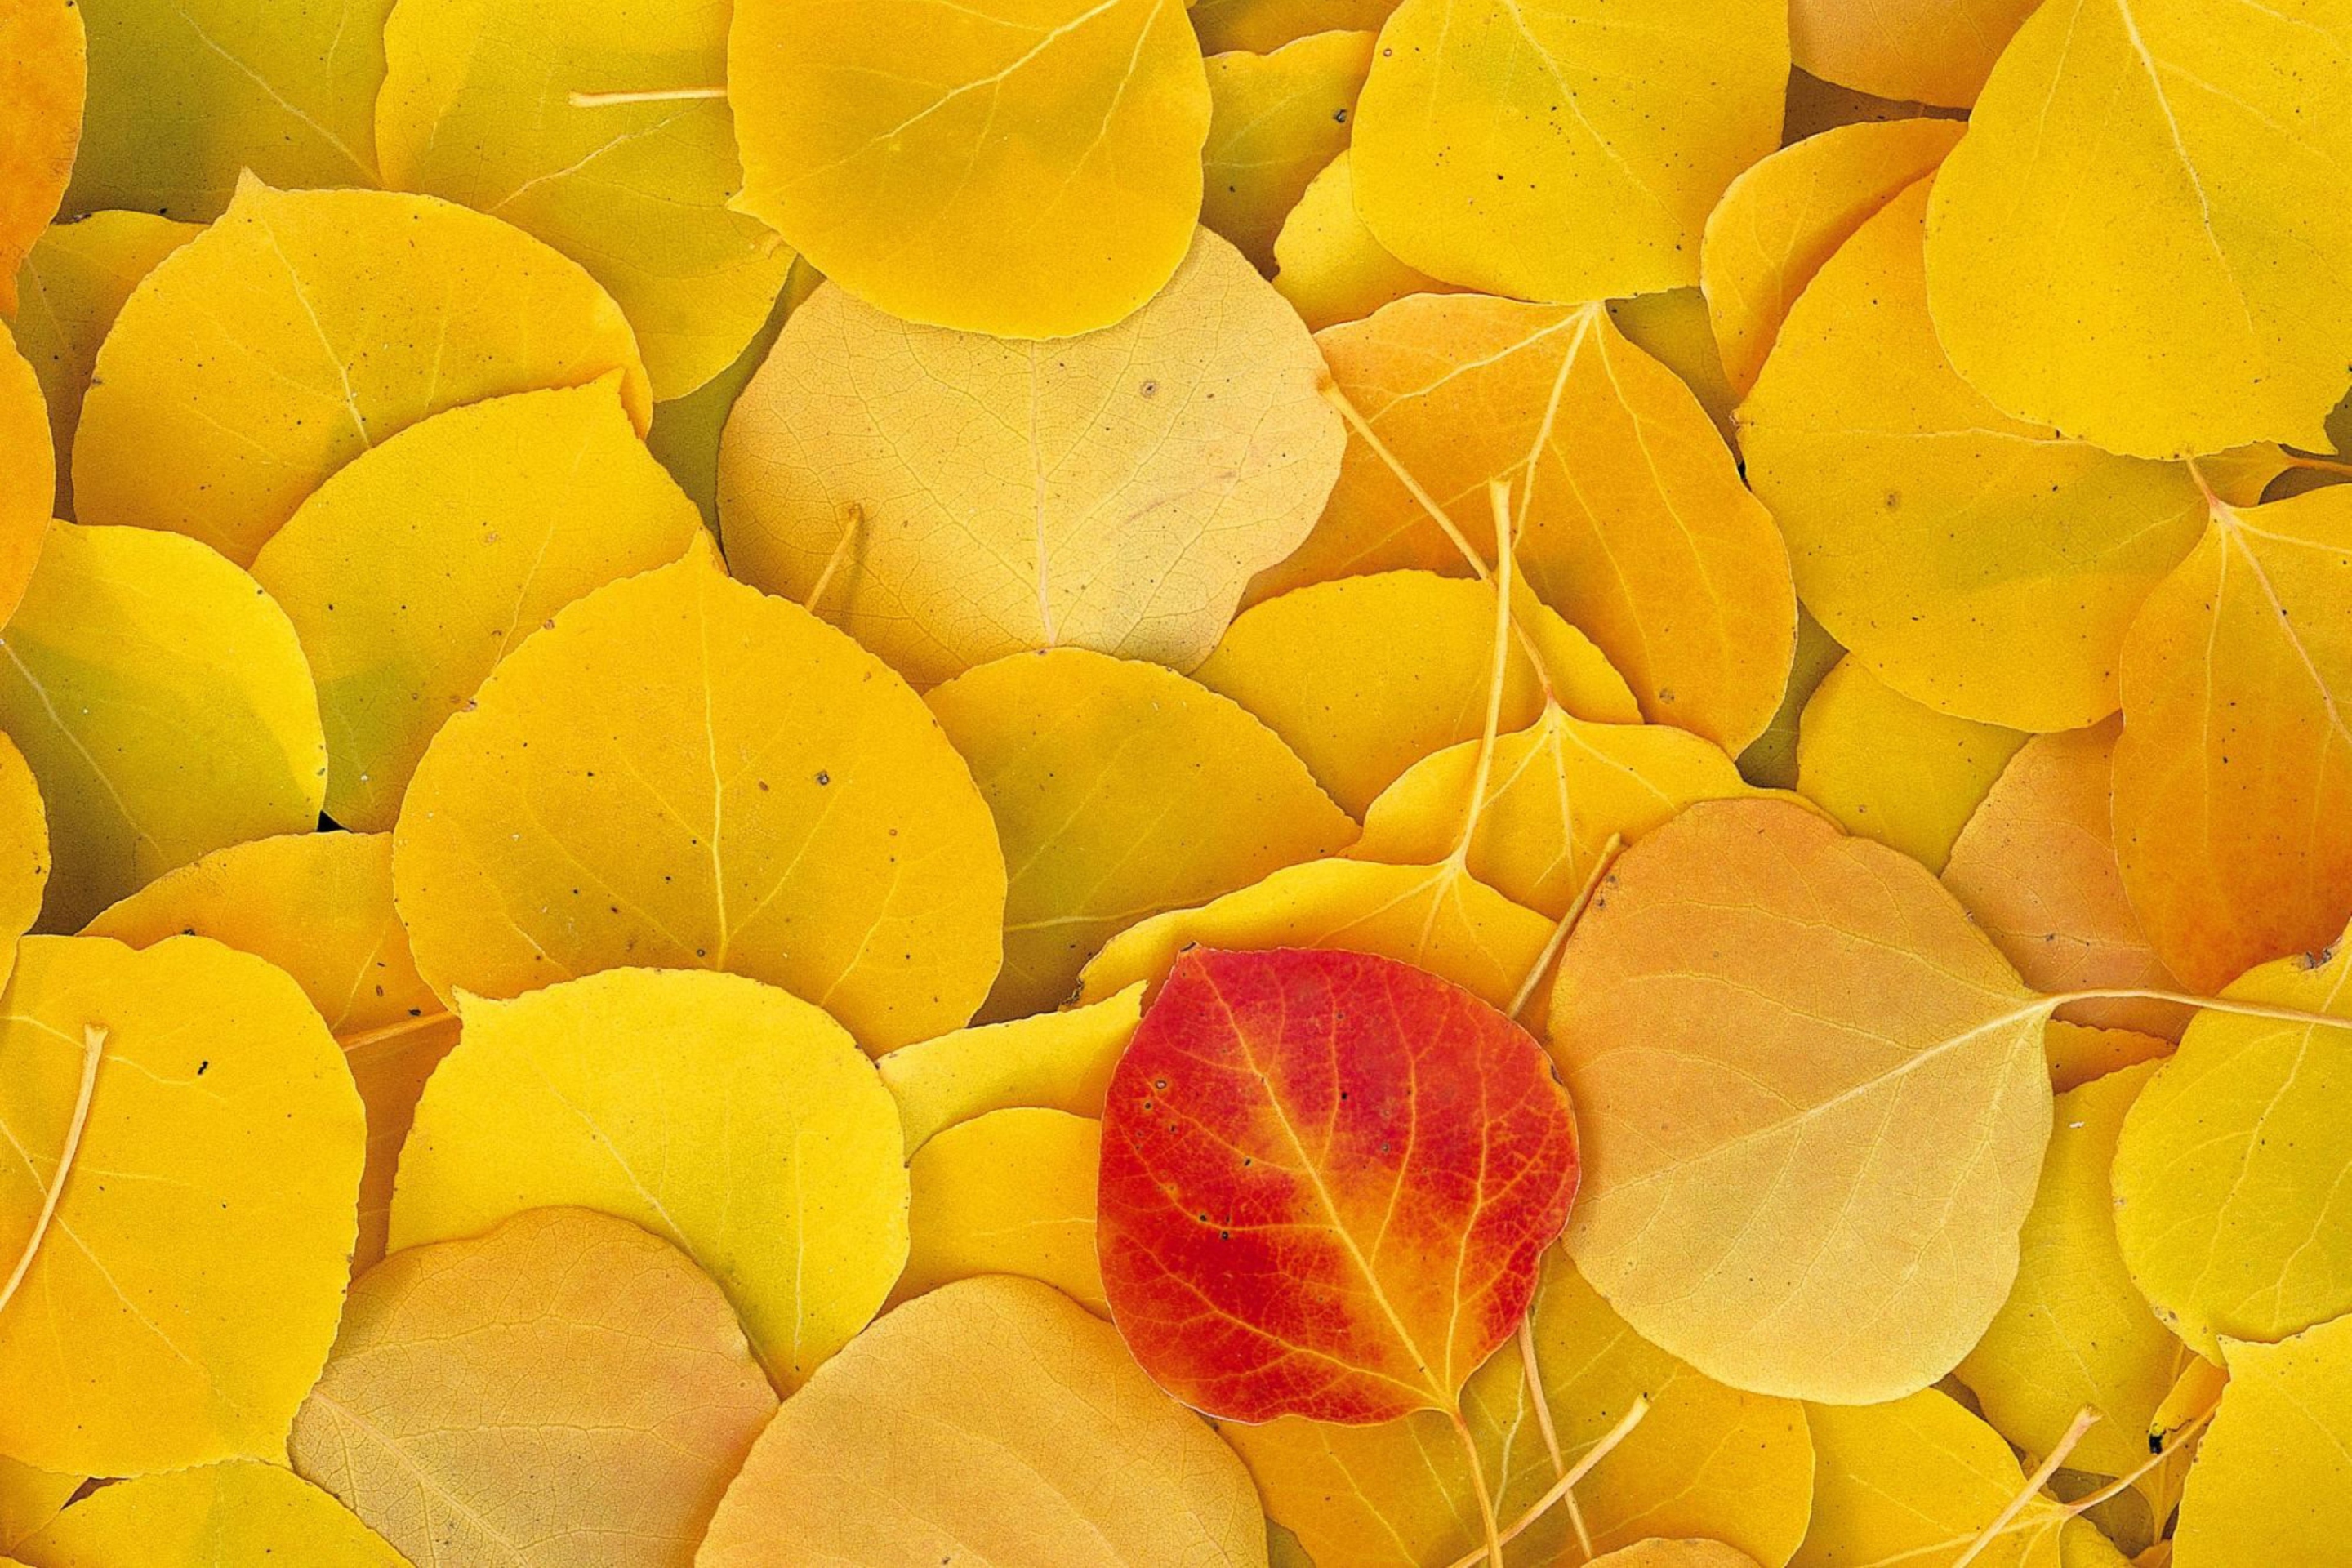 Red Leaf On Yellow Leaves wallpaper 2880x1920